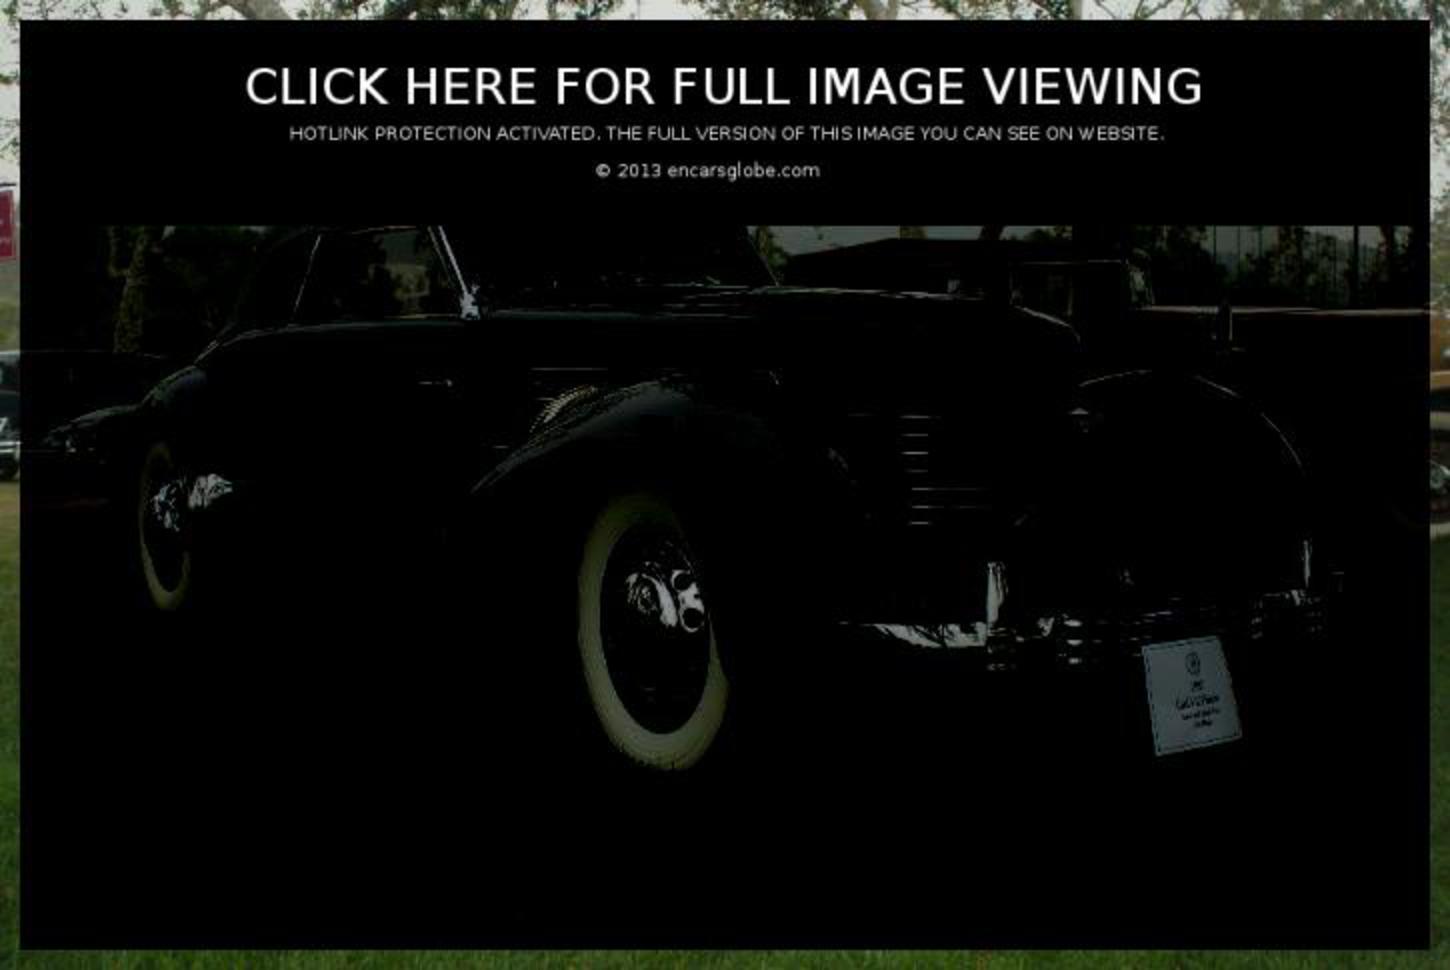 Cord Front-wheel drive roadster Photo Gallery: Photo #12 out of 7 ...